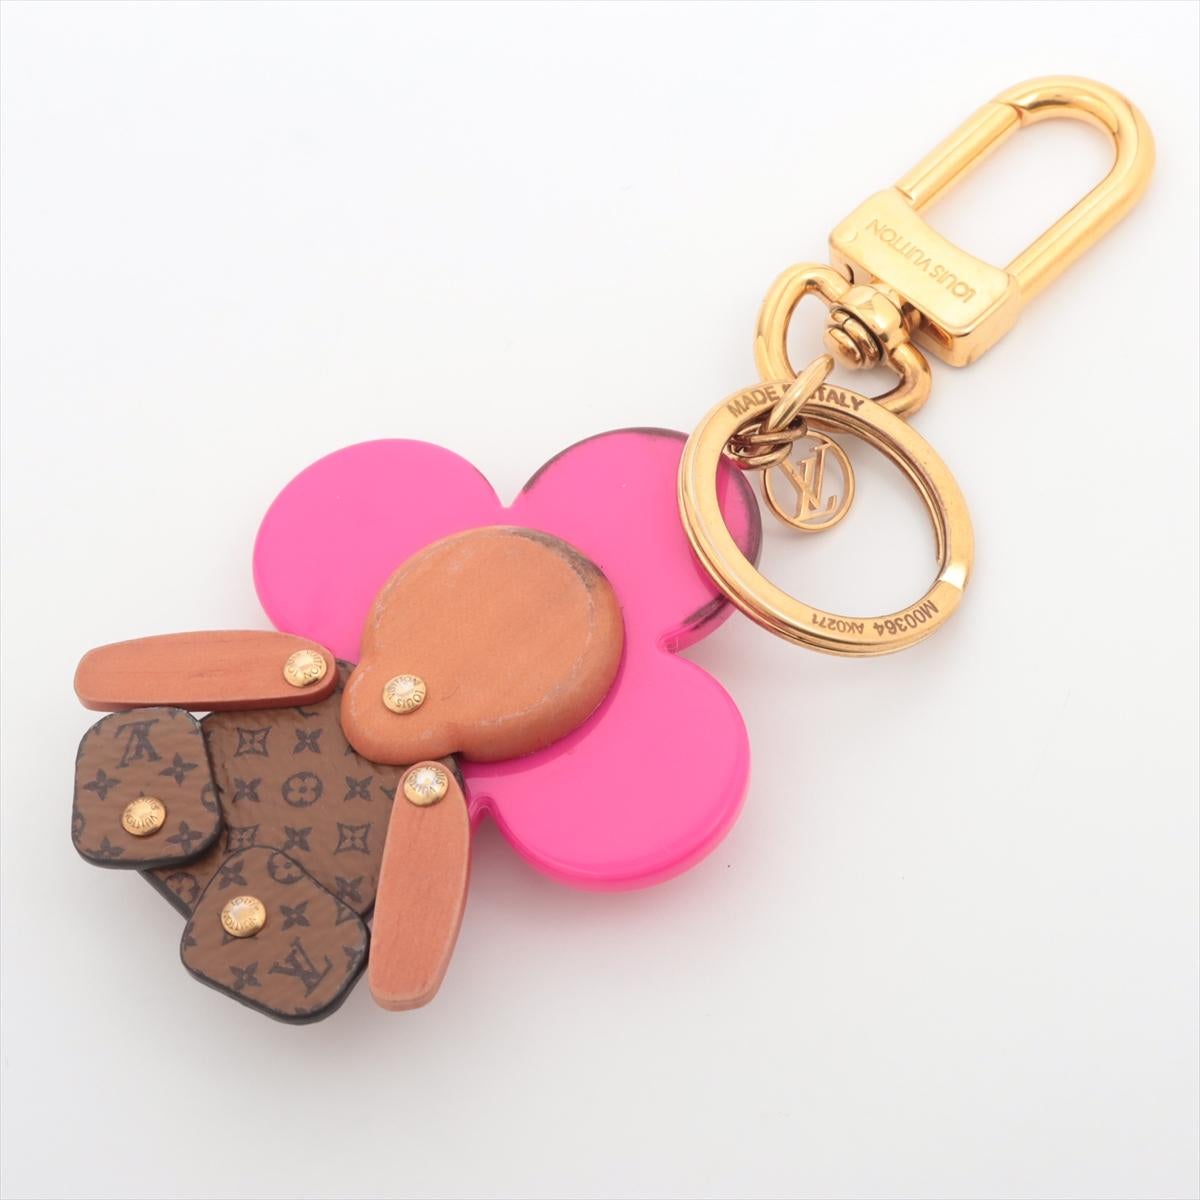 Louis Vuitton Vivienne Puppet Bag Charm In Good Condition For Sale In Indianapolis, IN